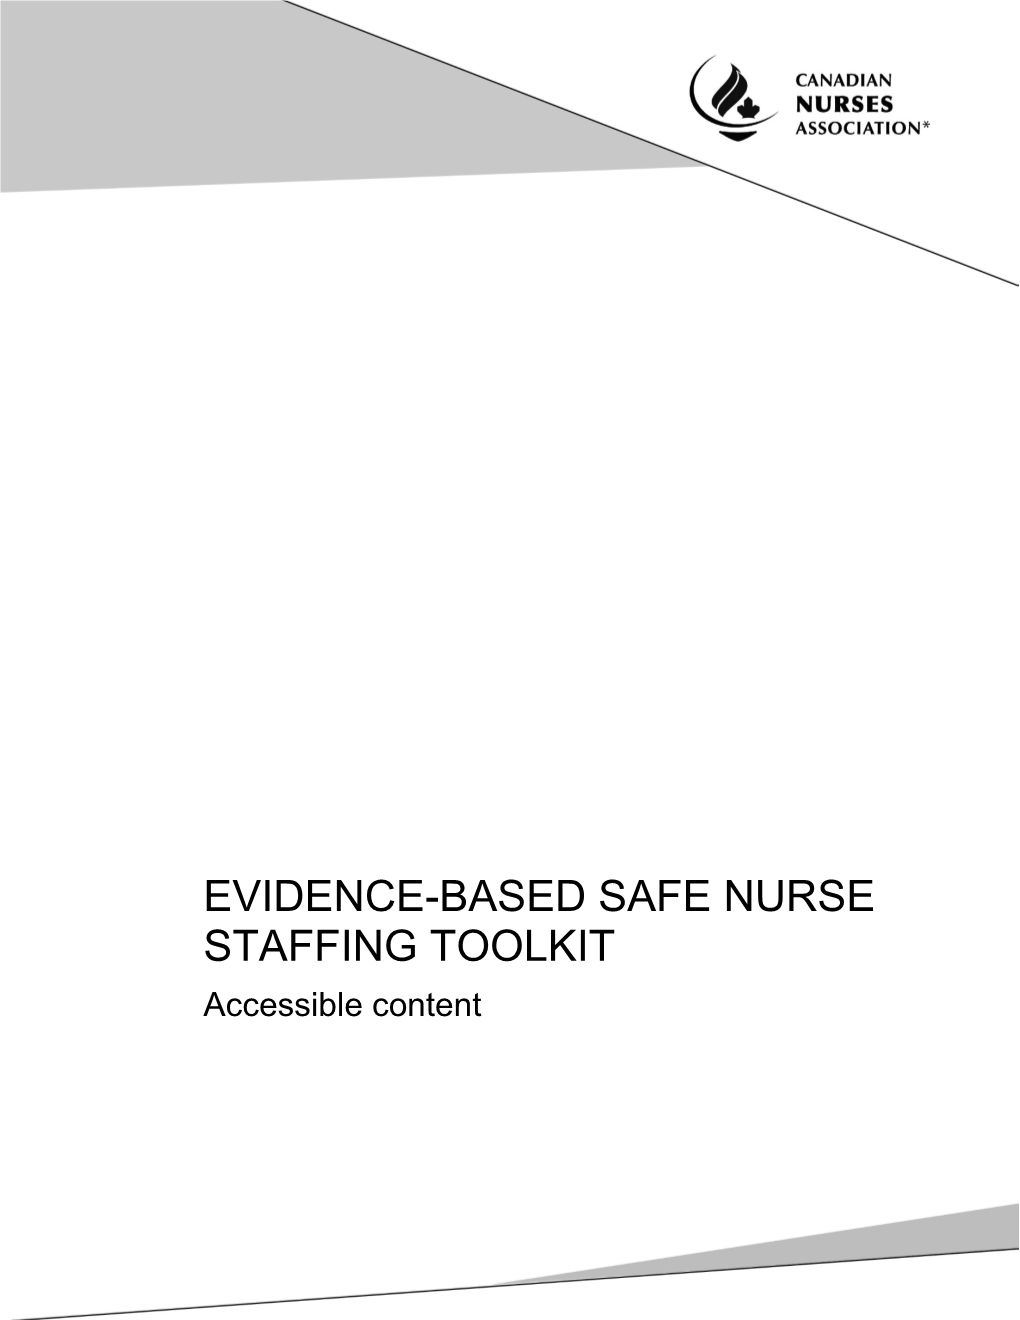 Evidence-Based Safe Nurse Staffing Toolkit: Accessible Content 3